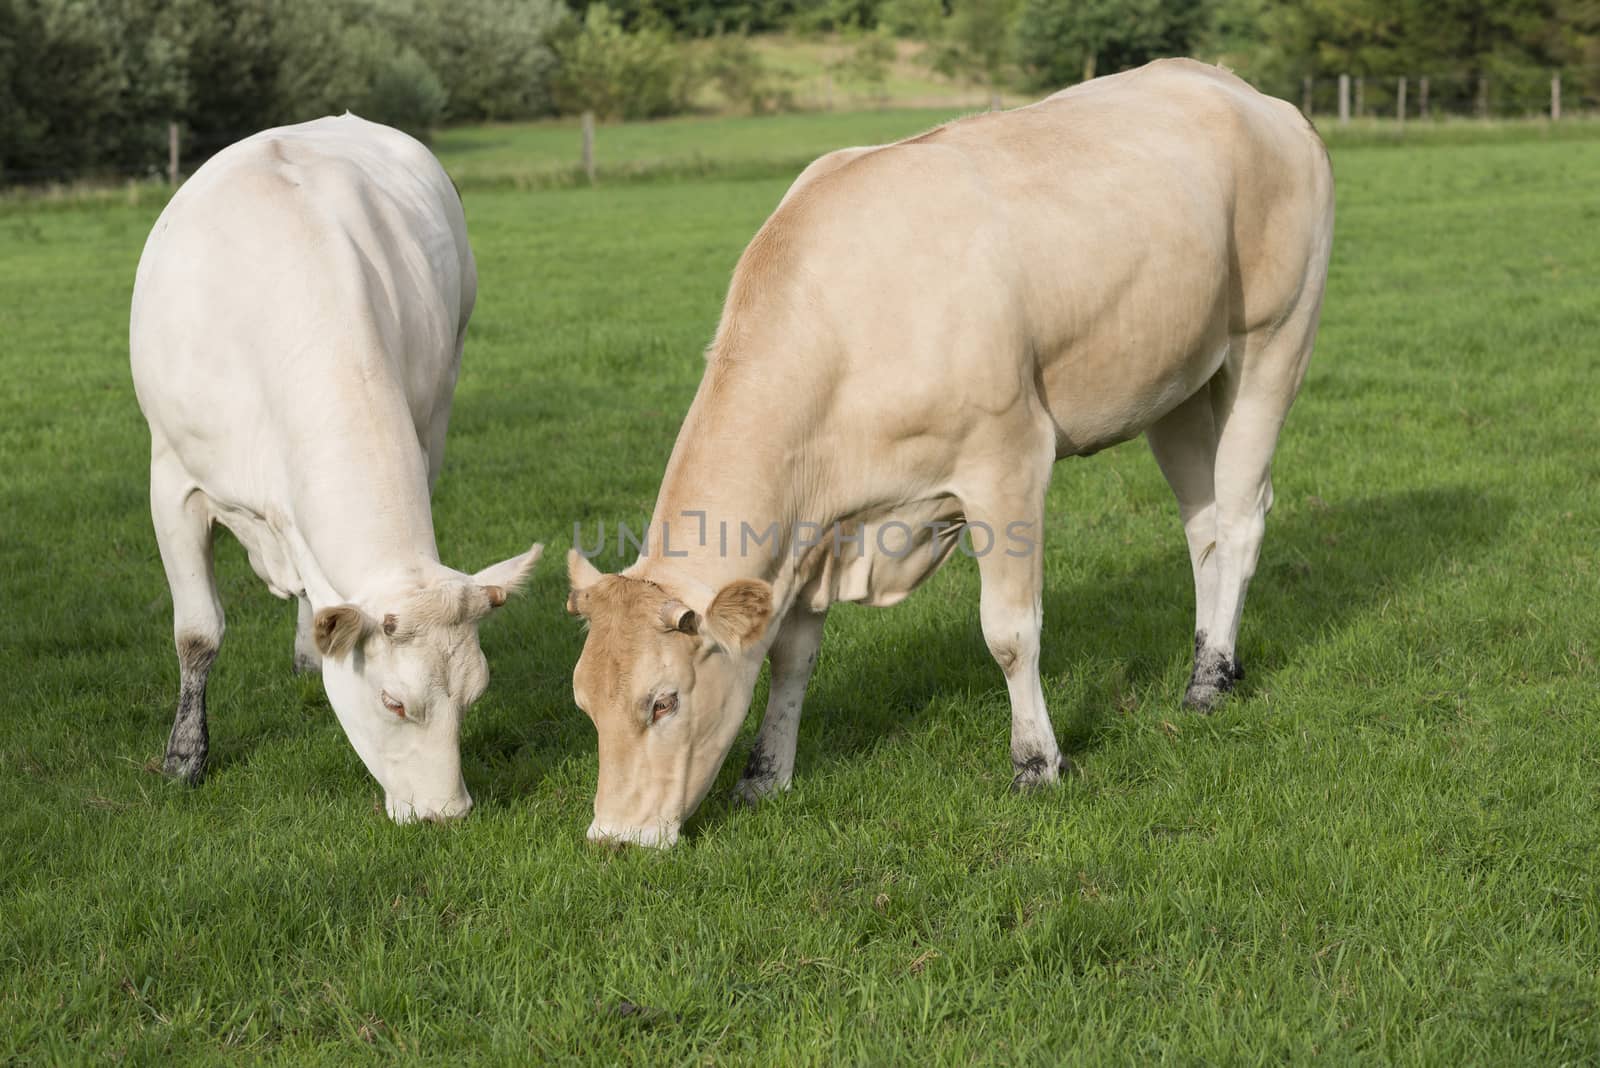 Two grazing light Jersey cows by Tofotografie